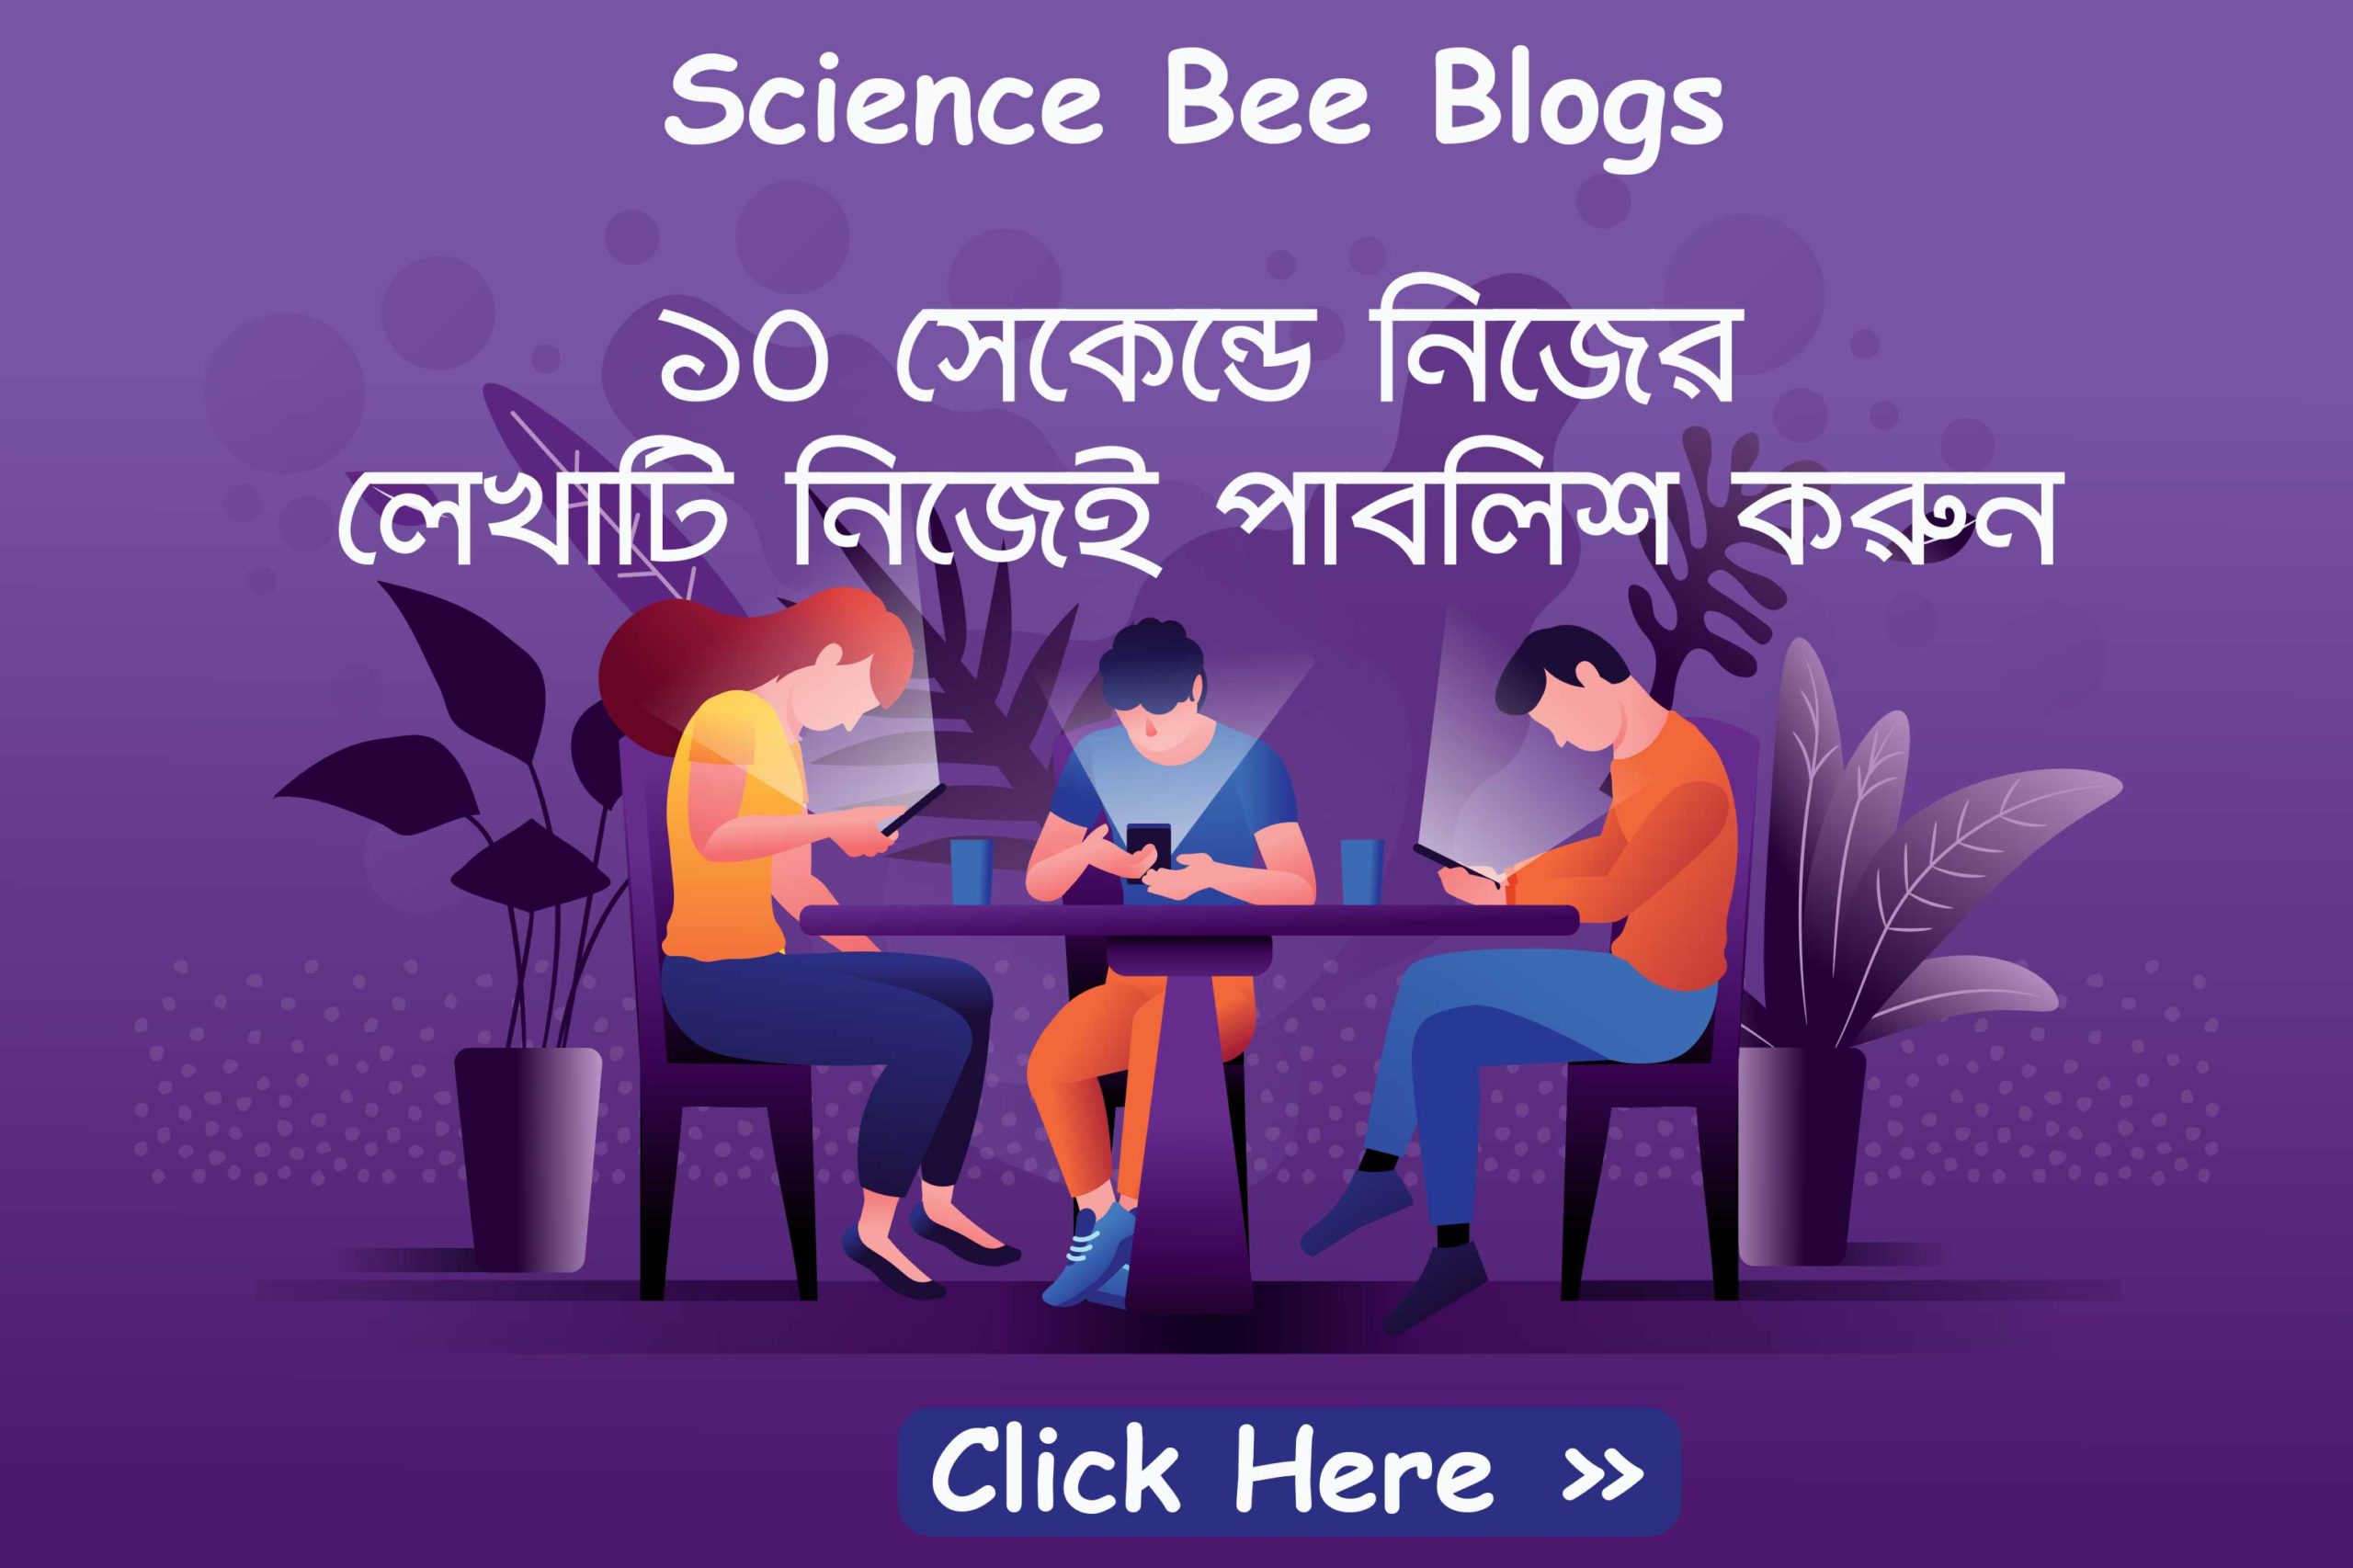 Science Bee | Daily Science